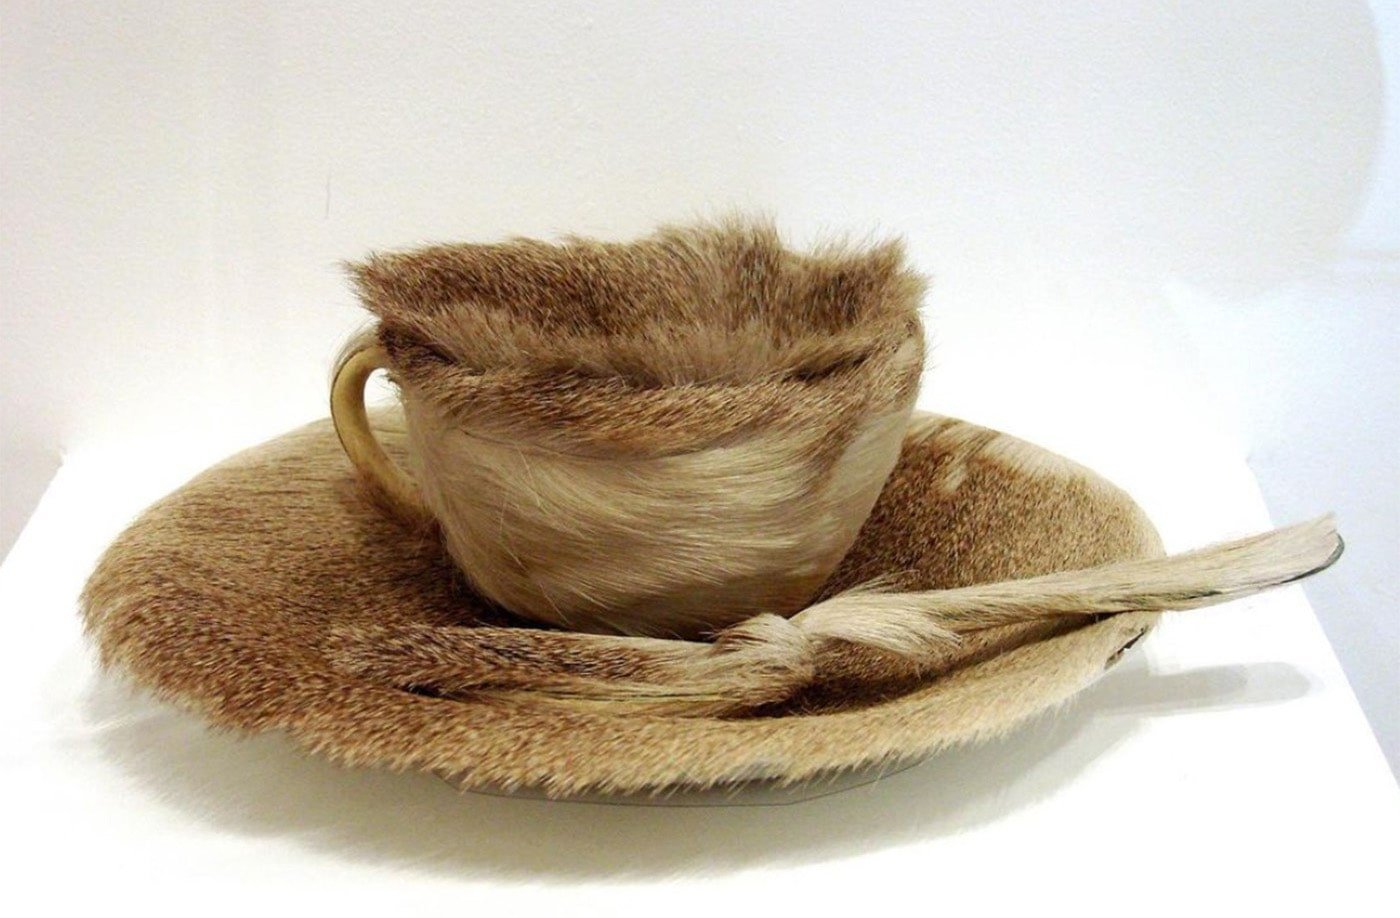 Teacup with saucer and spoon but the entire thing is completely furry.